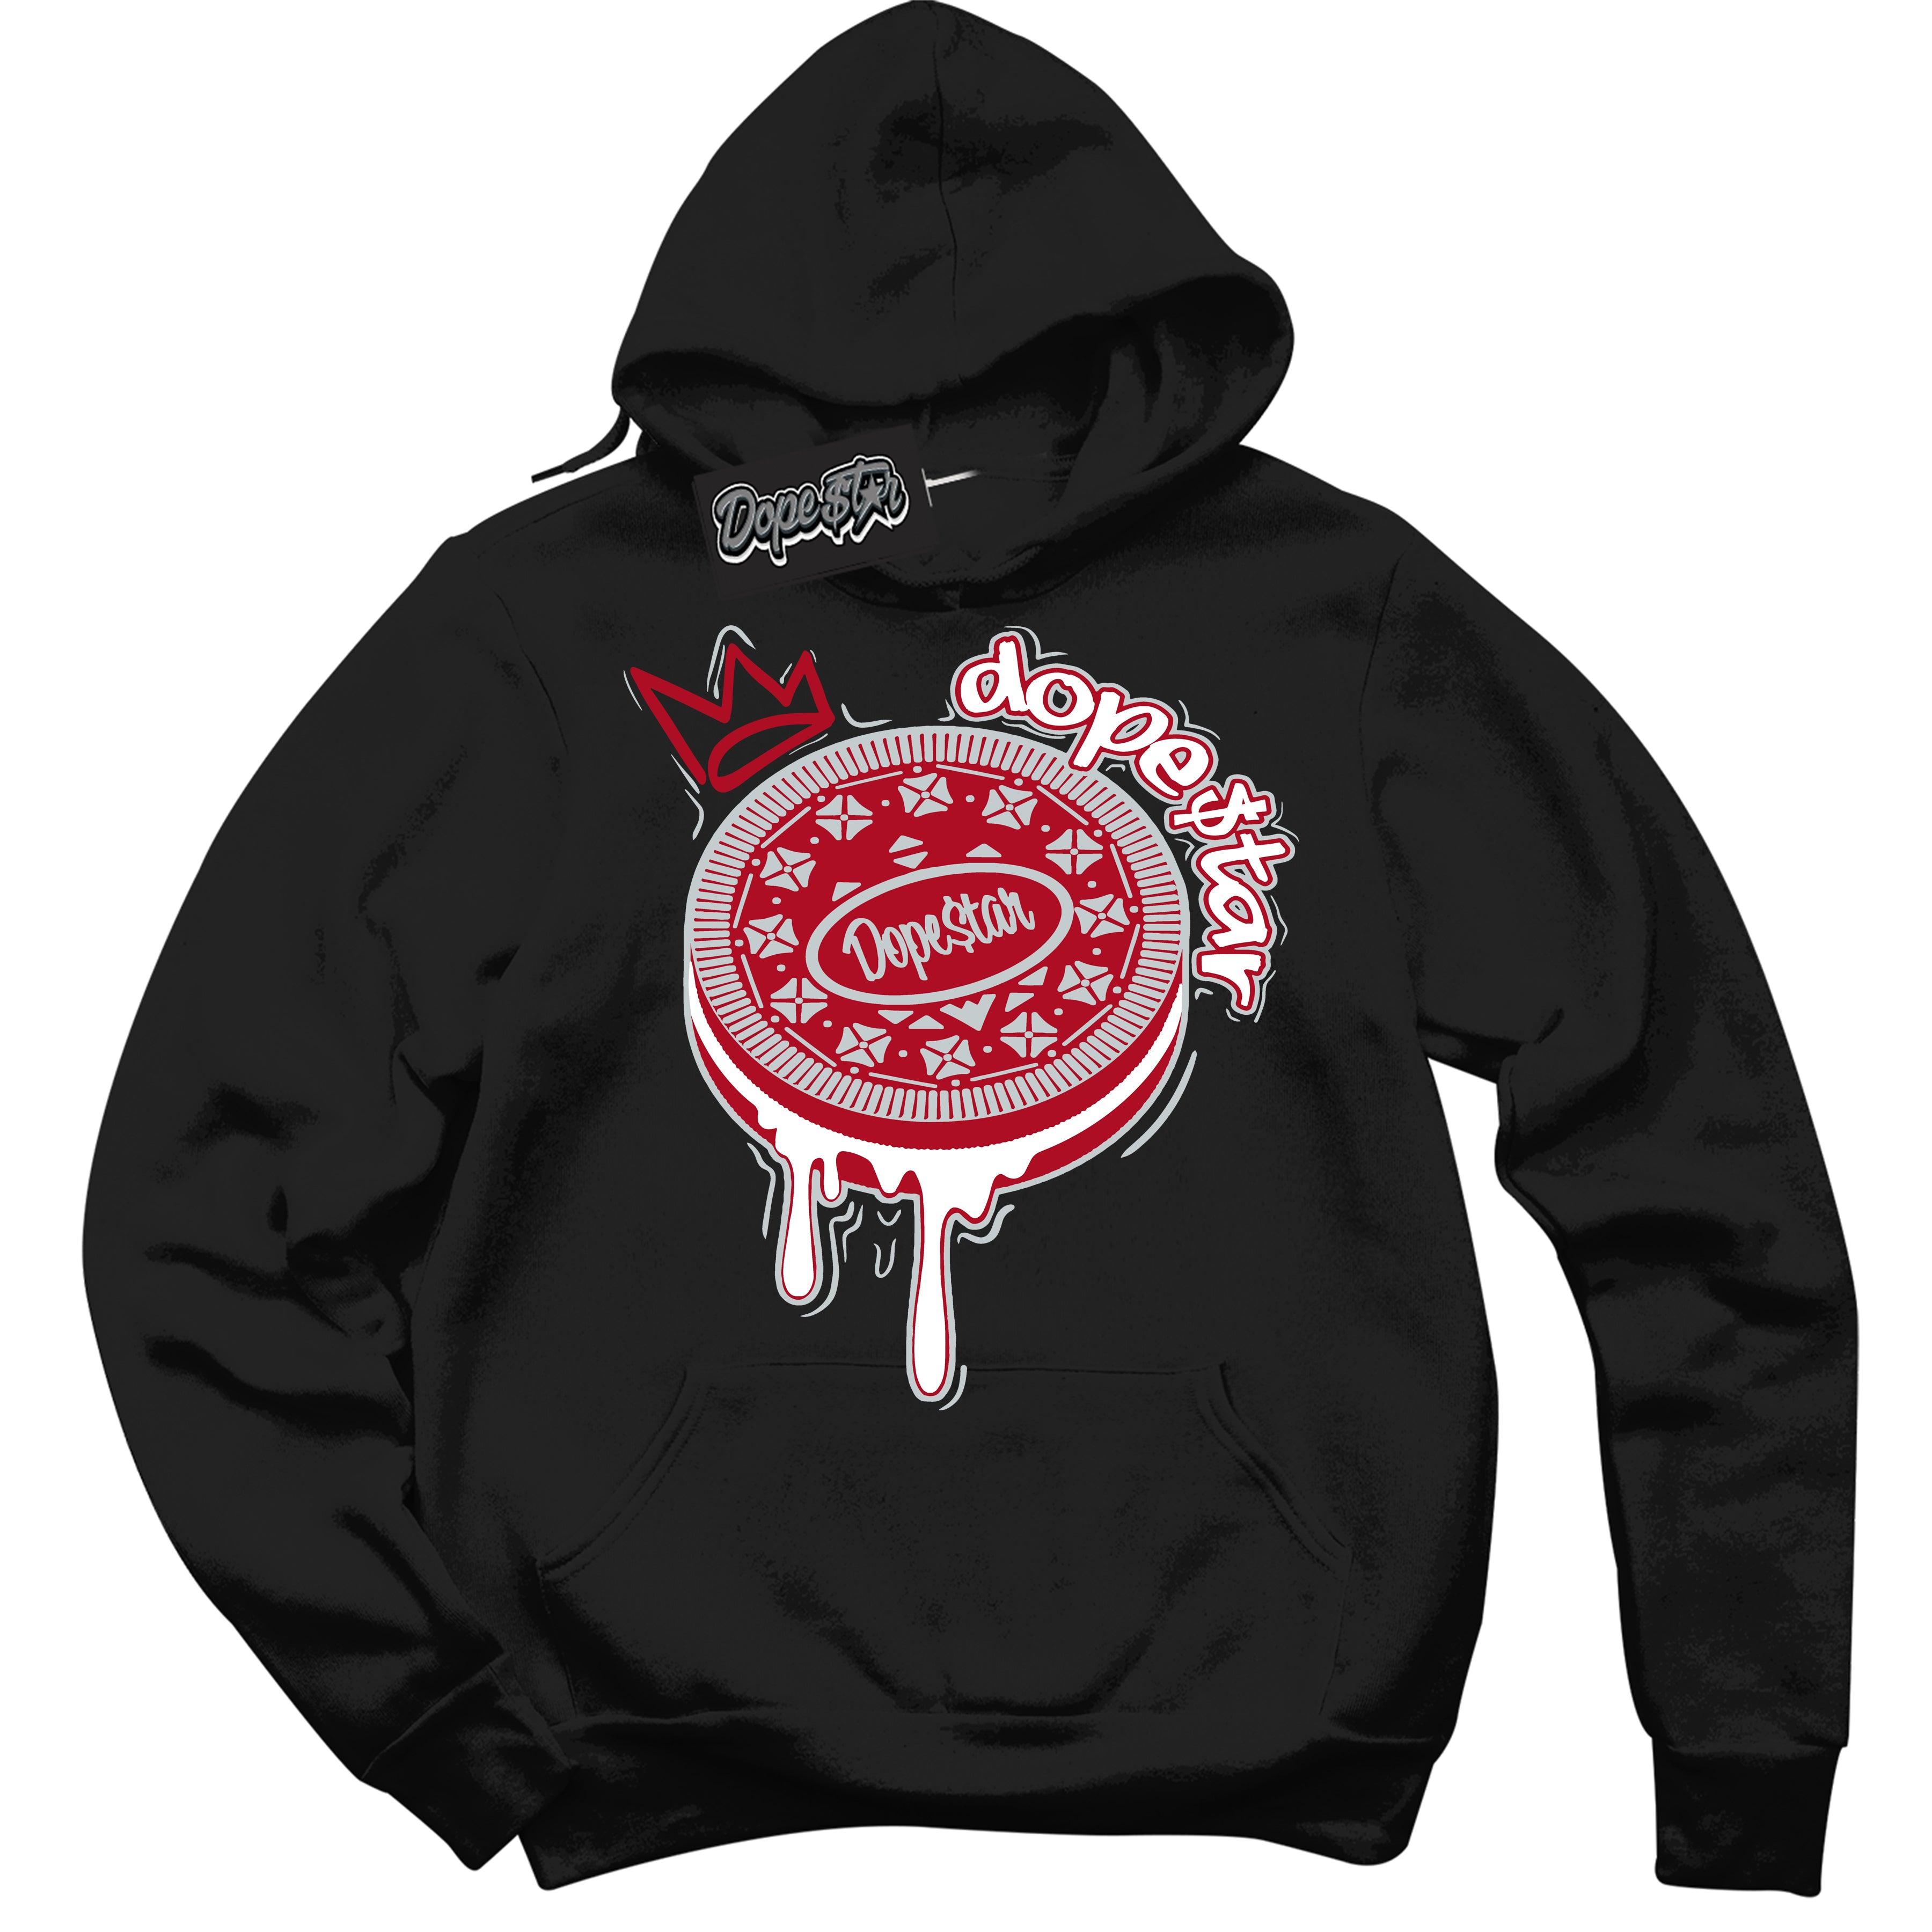 Cool Black Hoodie with “ Oreo DS ”  design that Perfectly Matches  Reverse Ultraman Sneakers.